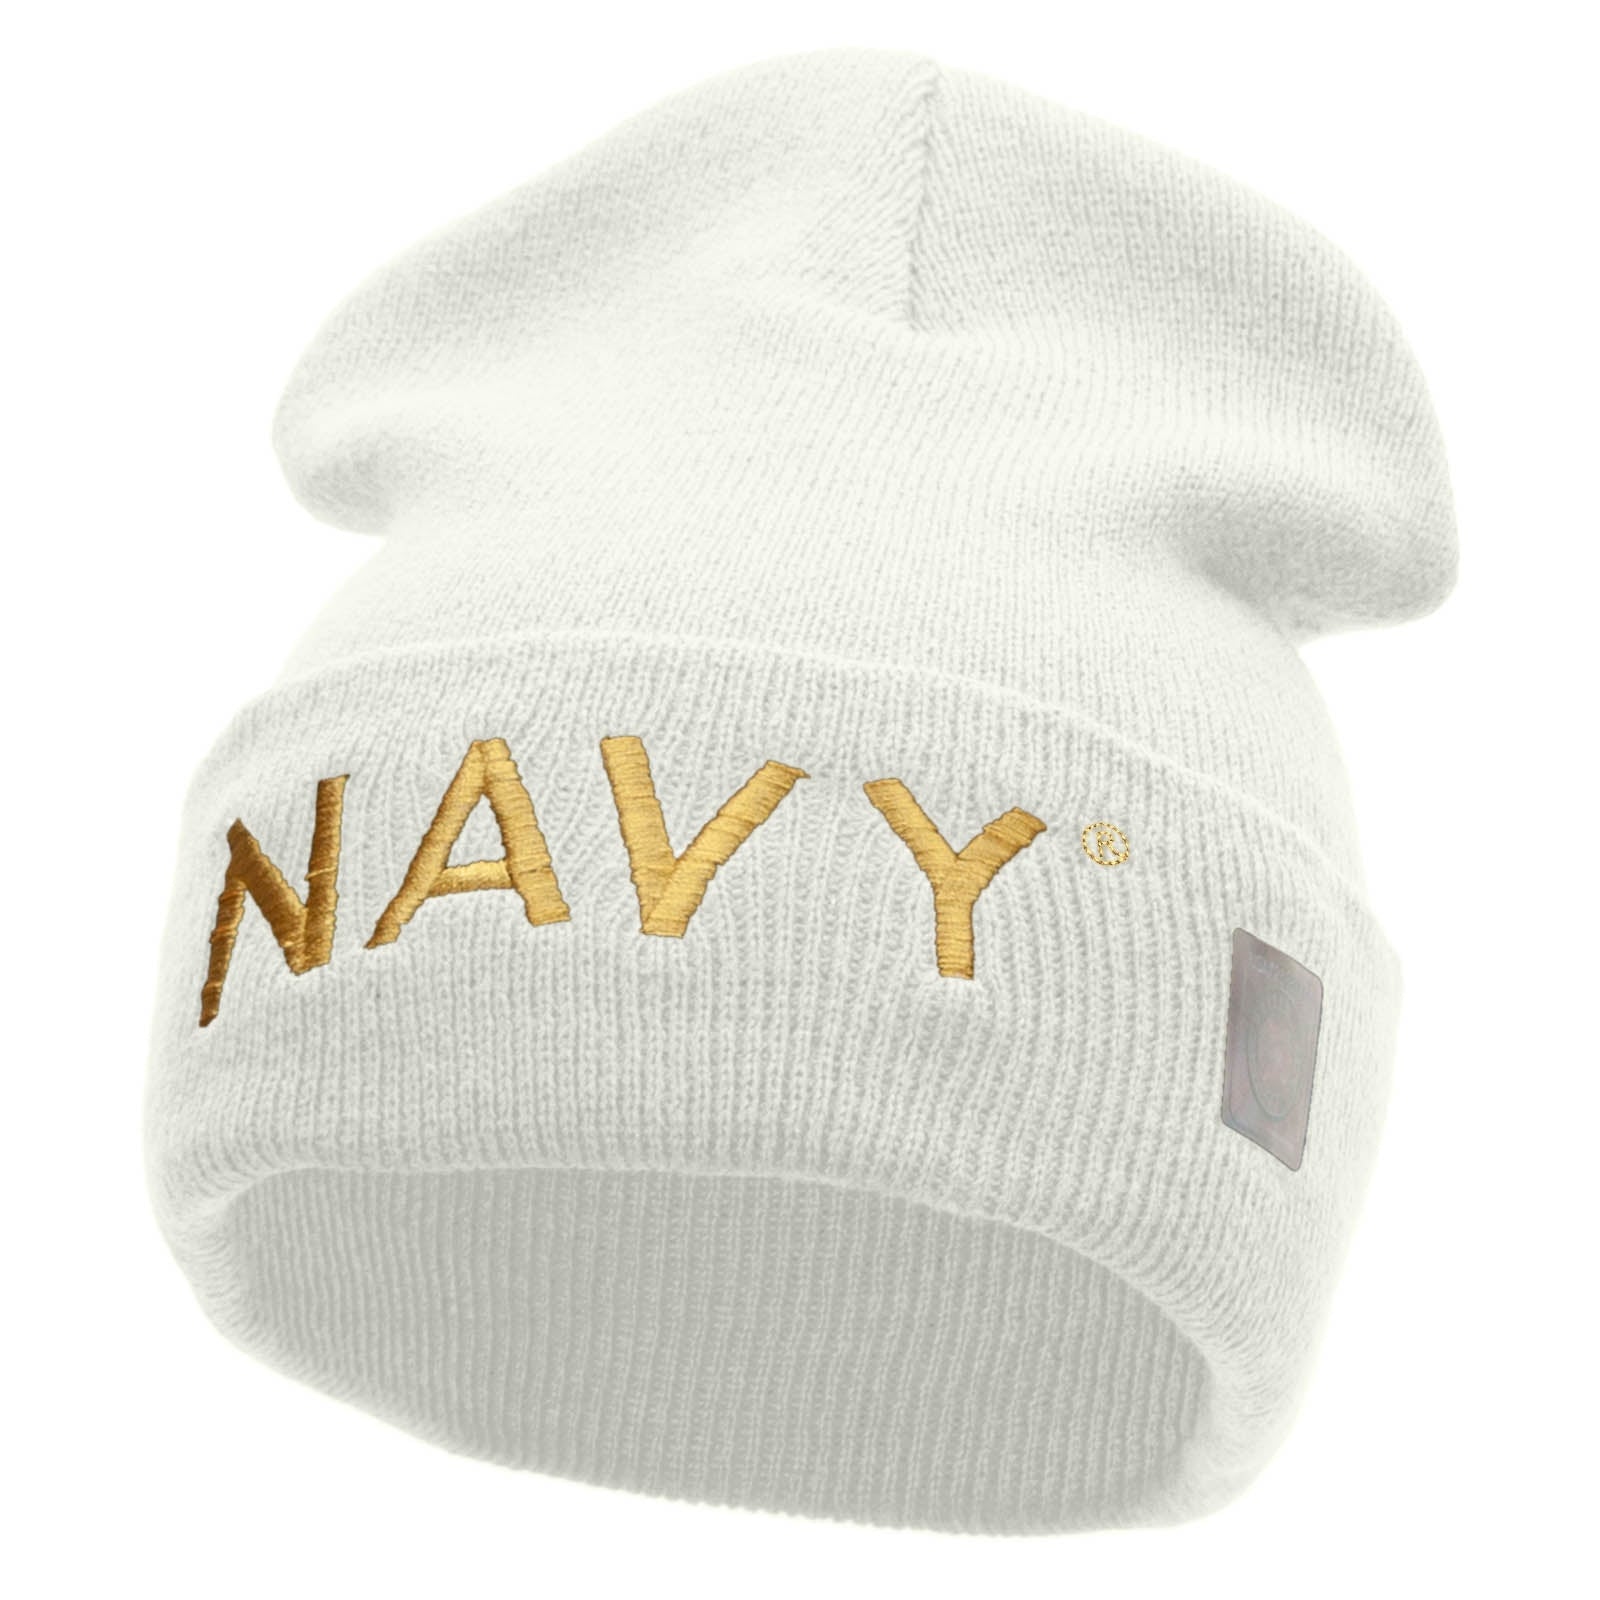 Licensed Navy Embroidered Long Knitted Beanie Made in USA - White OSFM